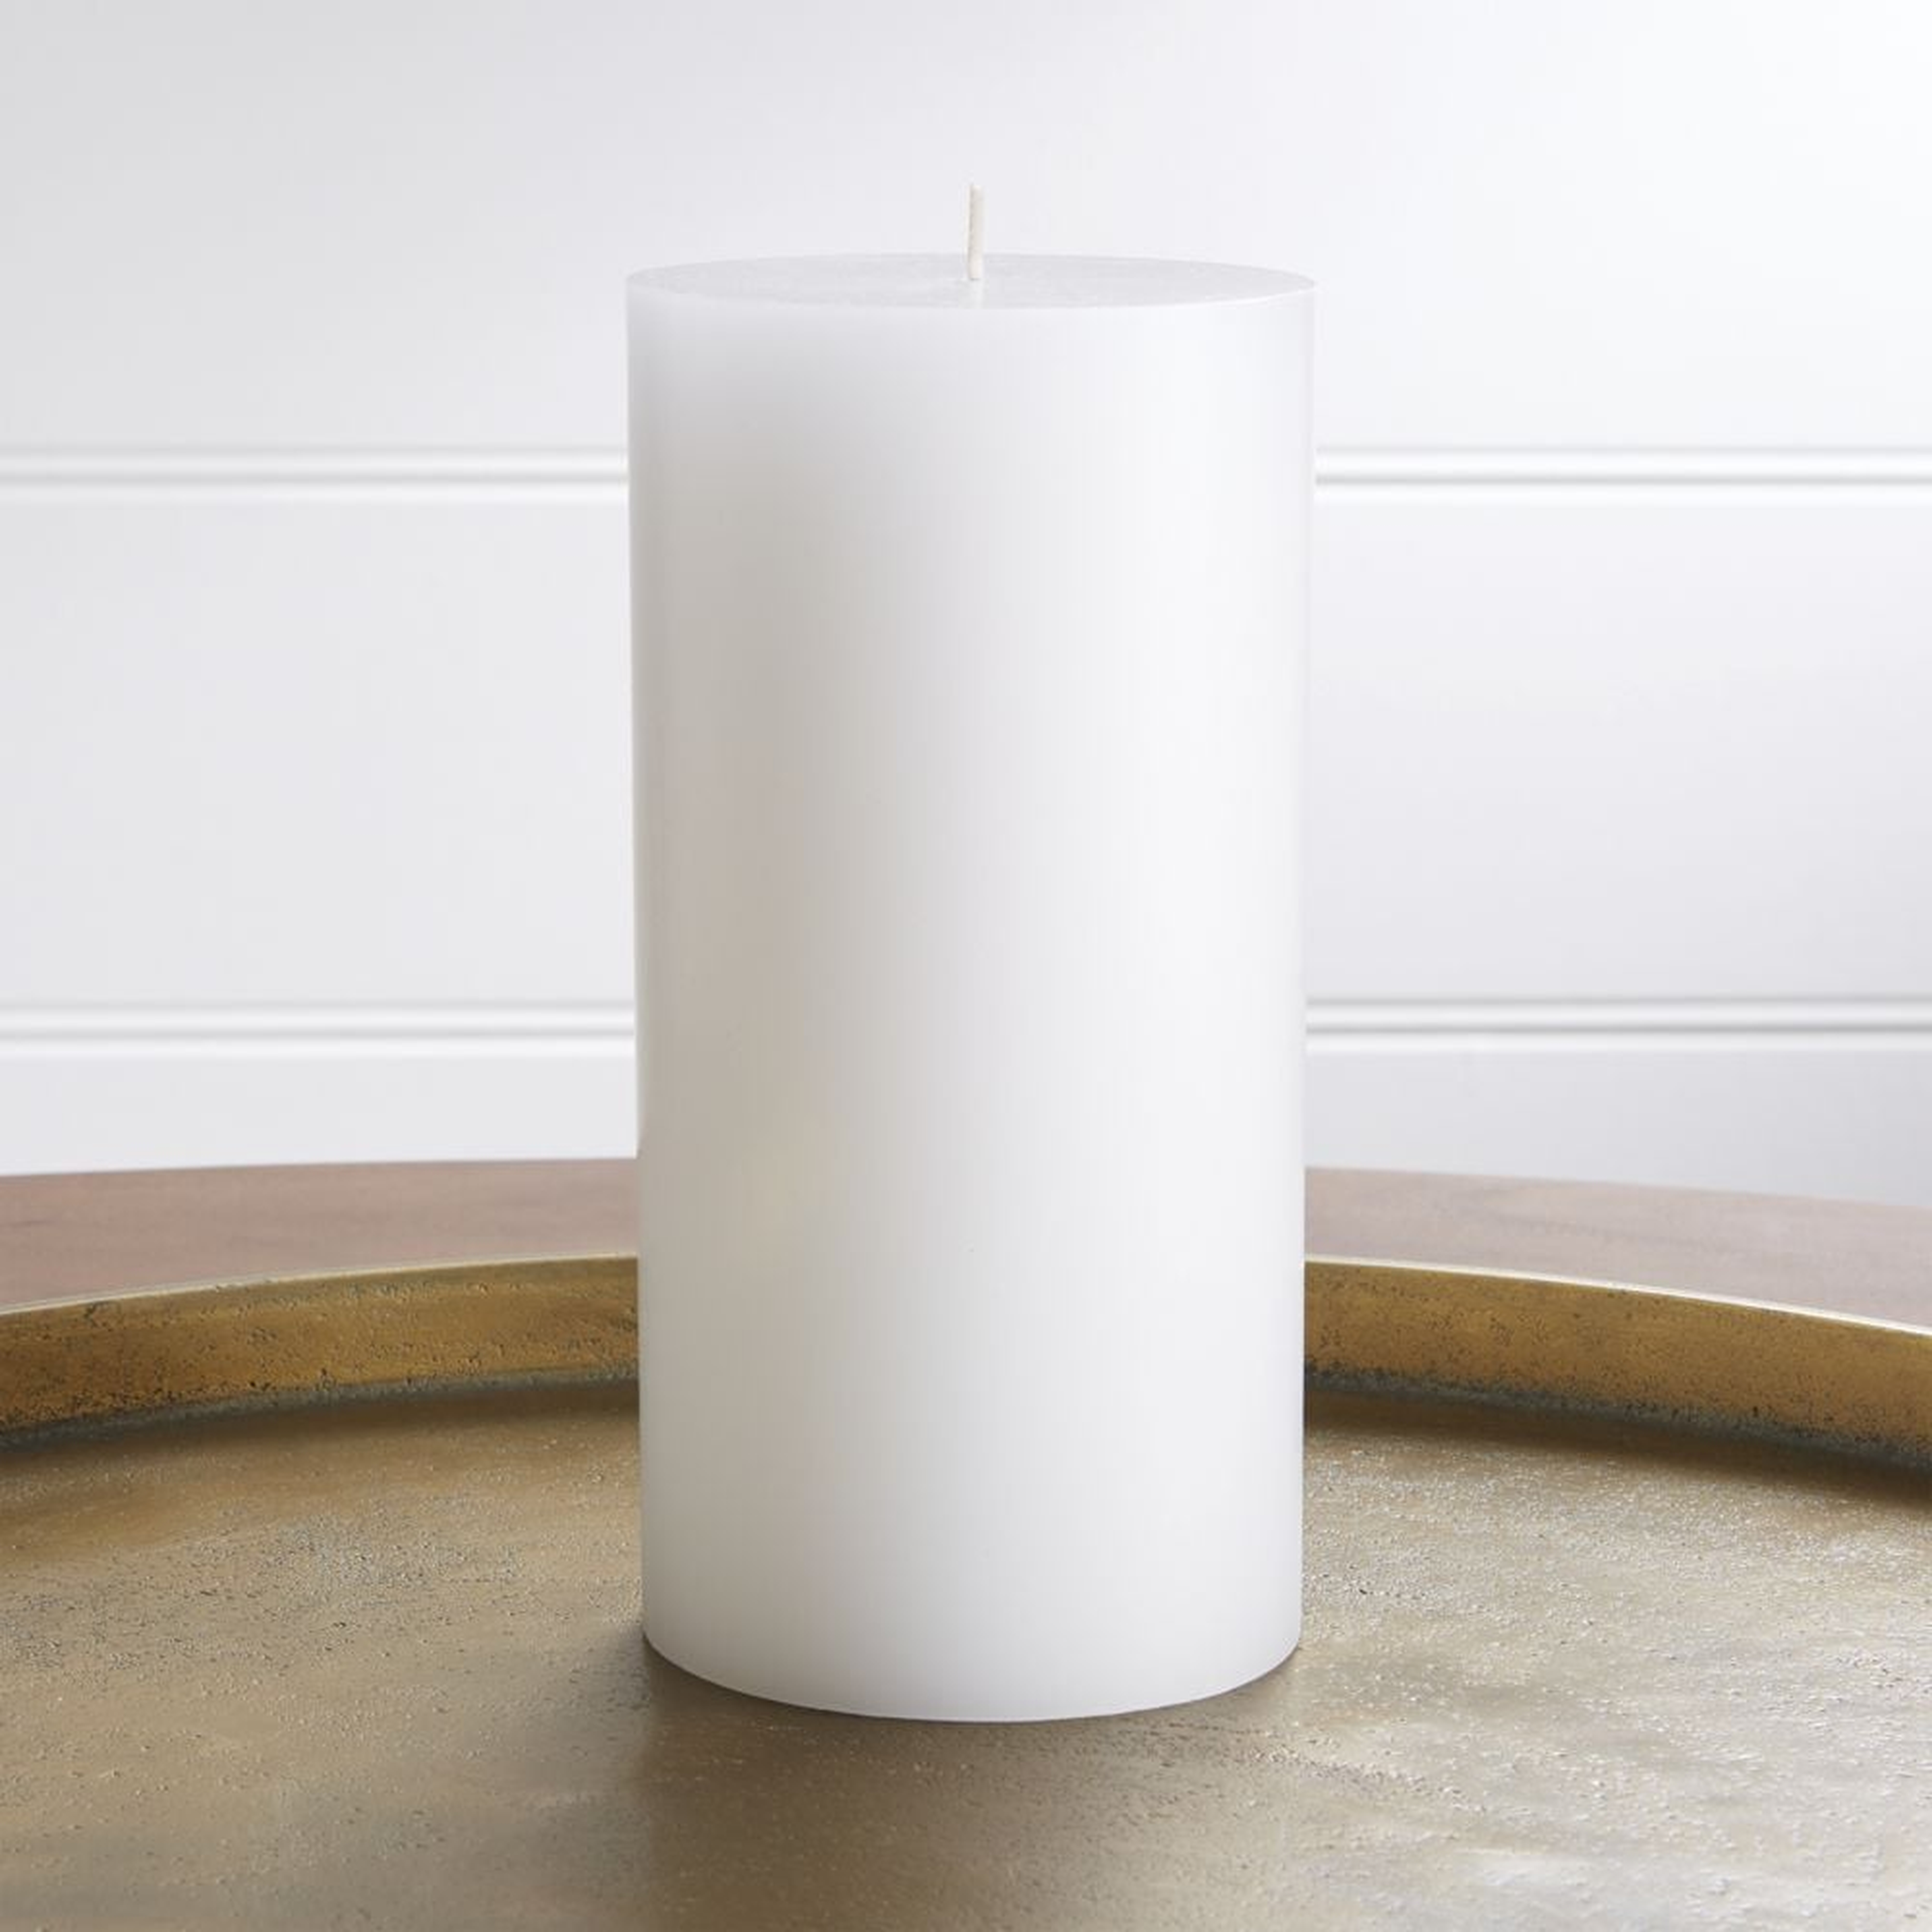 4"x8" White Pillar Candle - Crate and Barrel